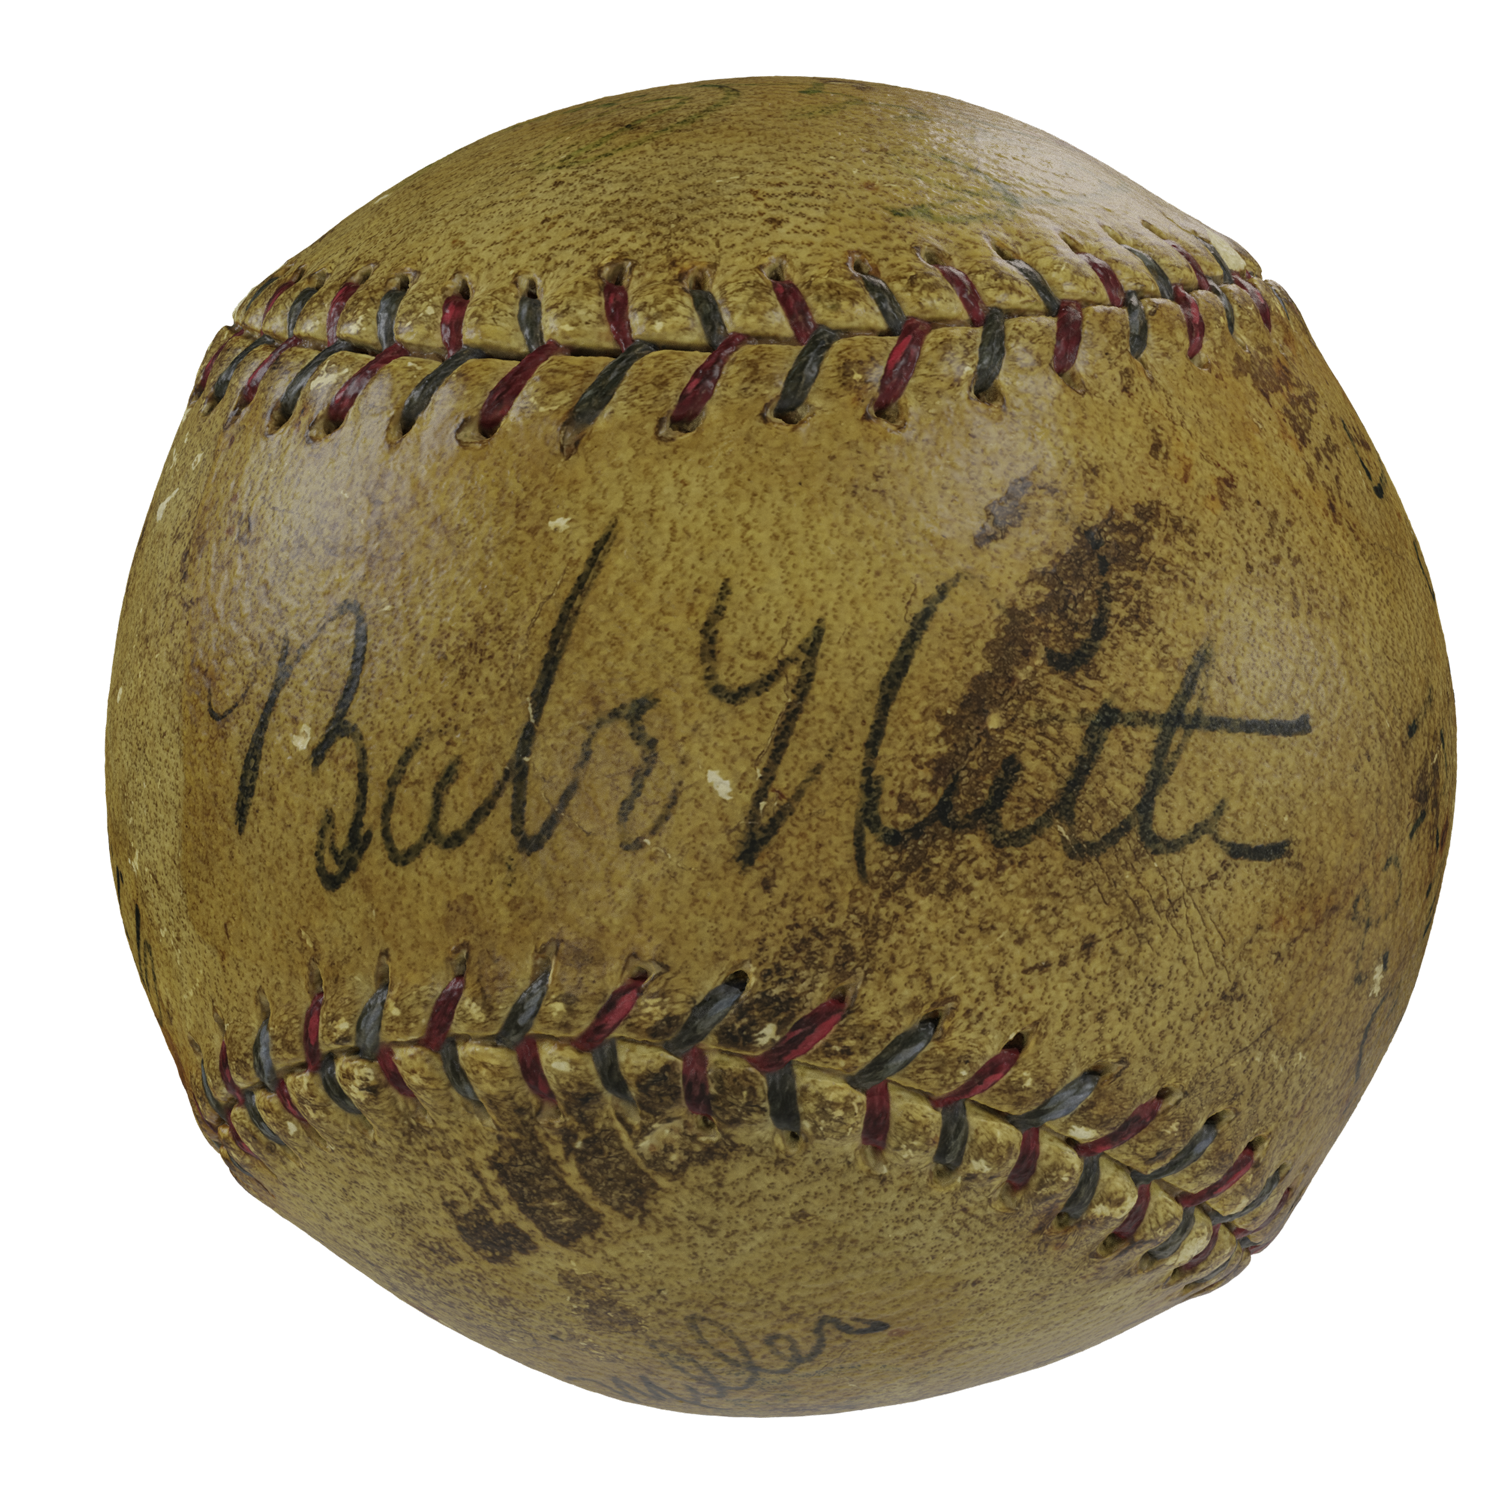 1930 Lou Gehrig home run ball signed by Lou Gehrig and Babe Ruth